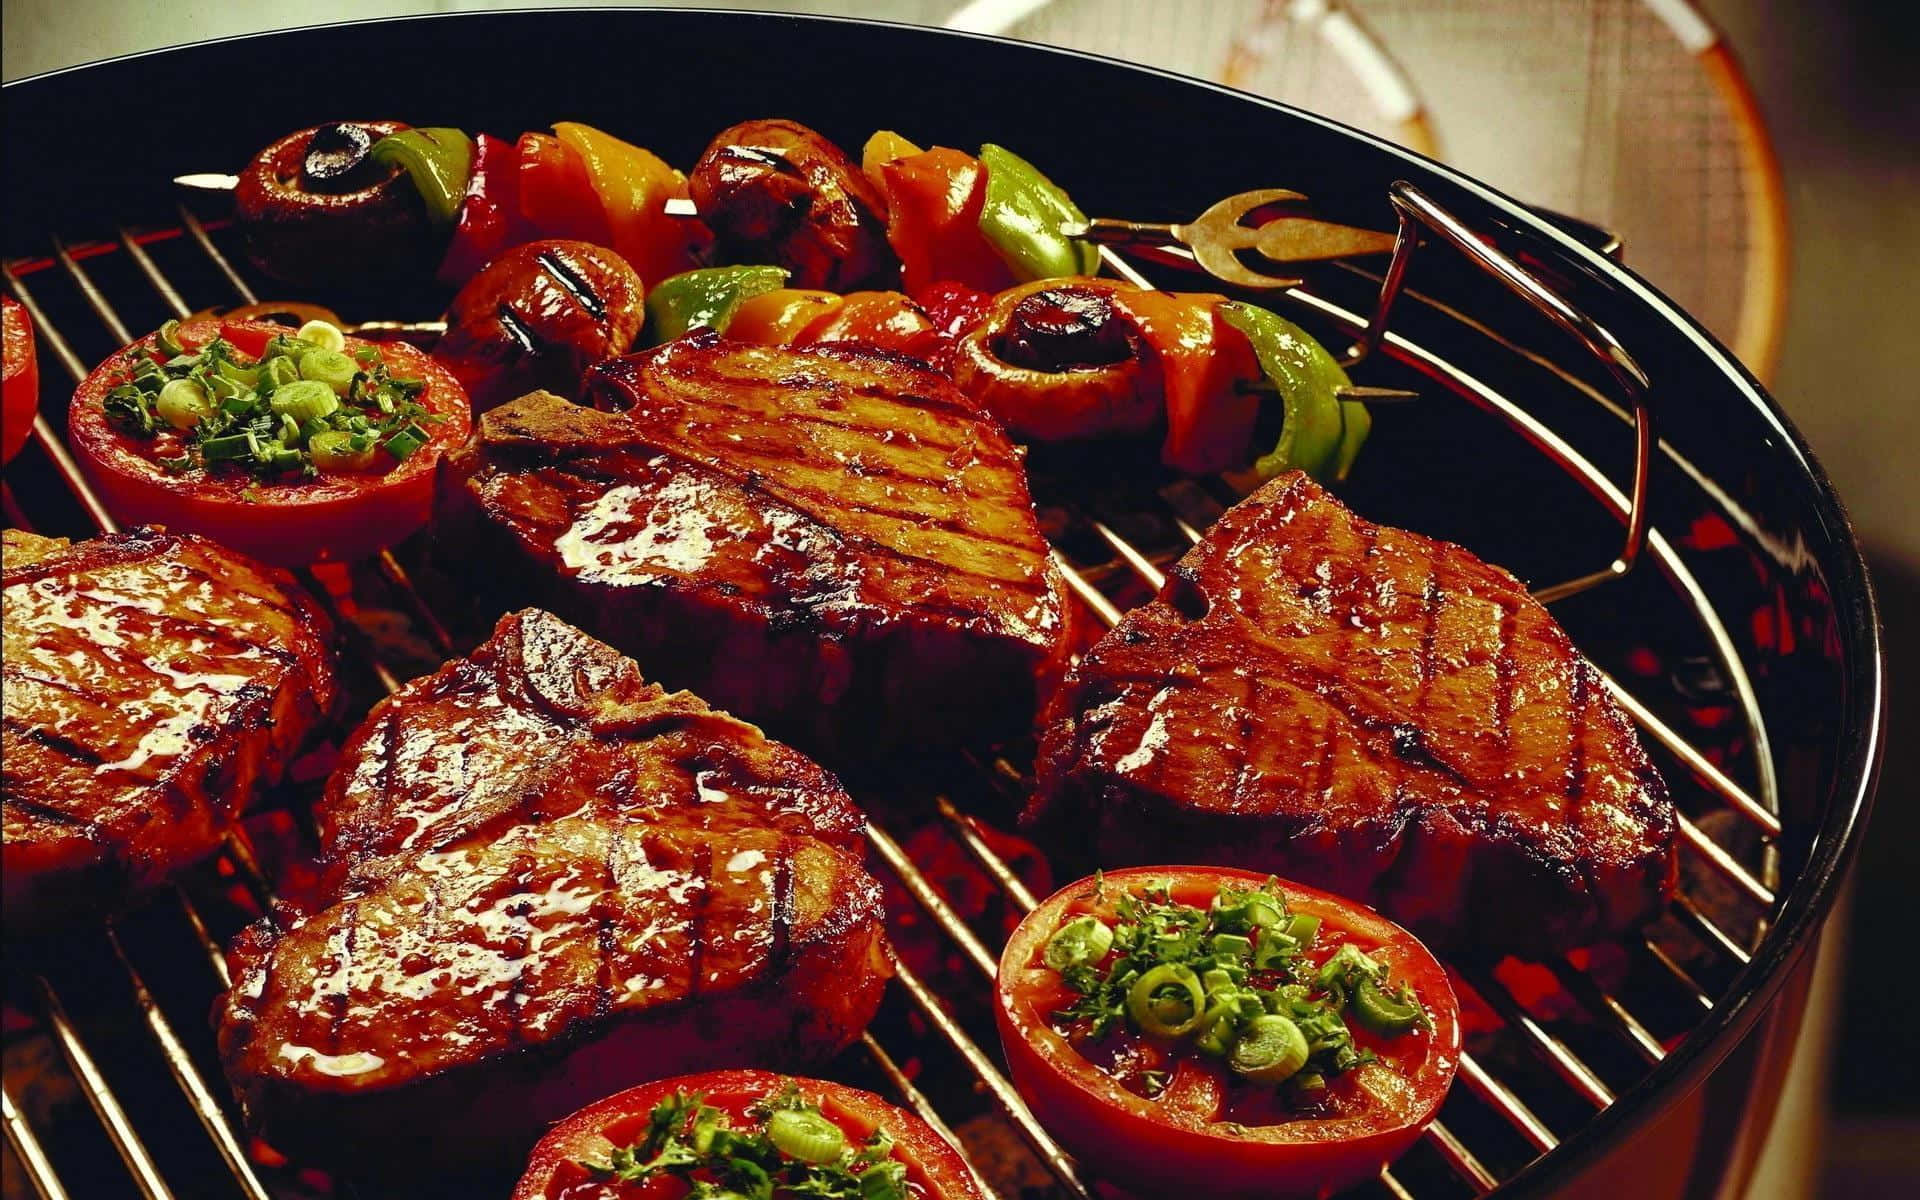 A Grill With Meat And Vegetables On It